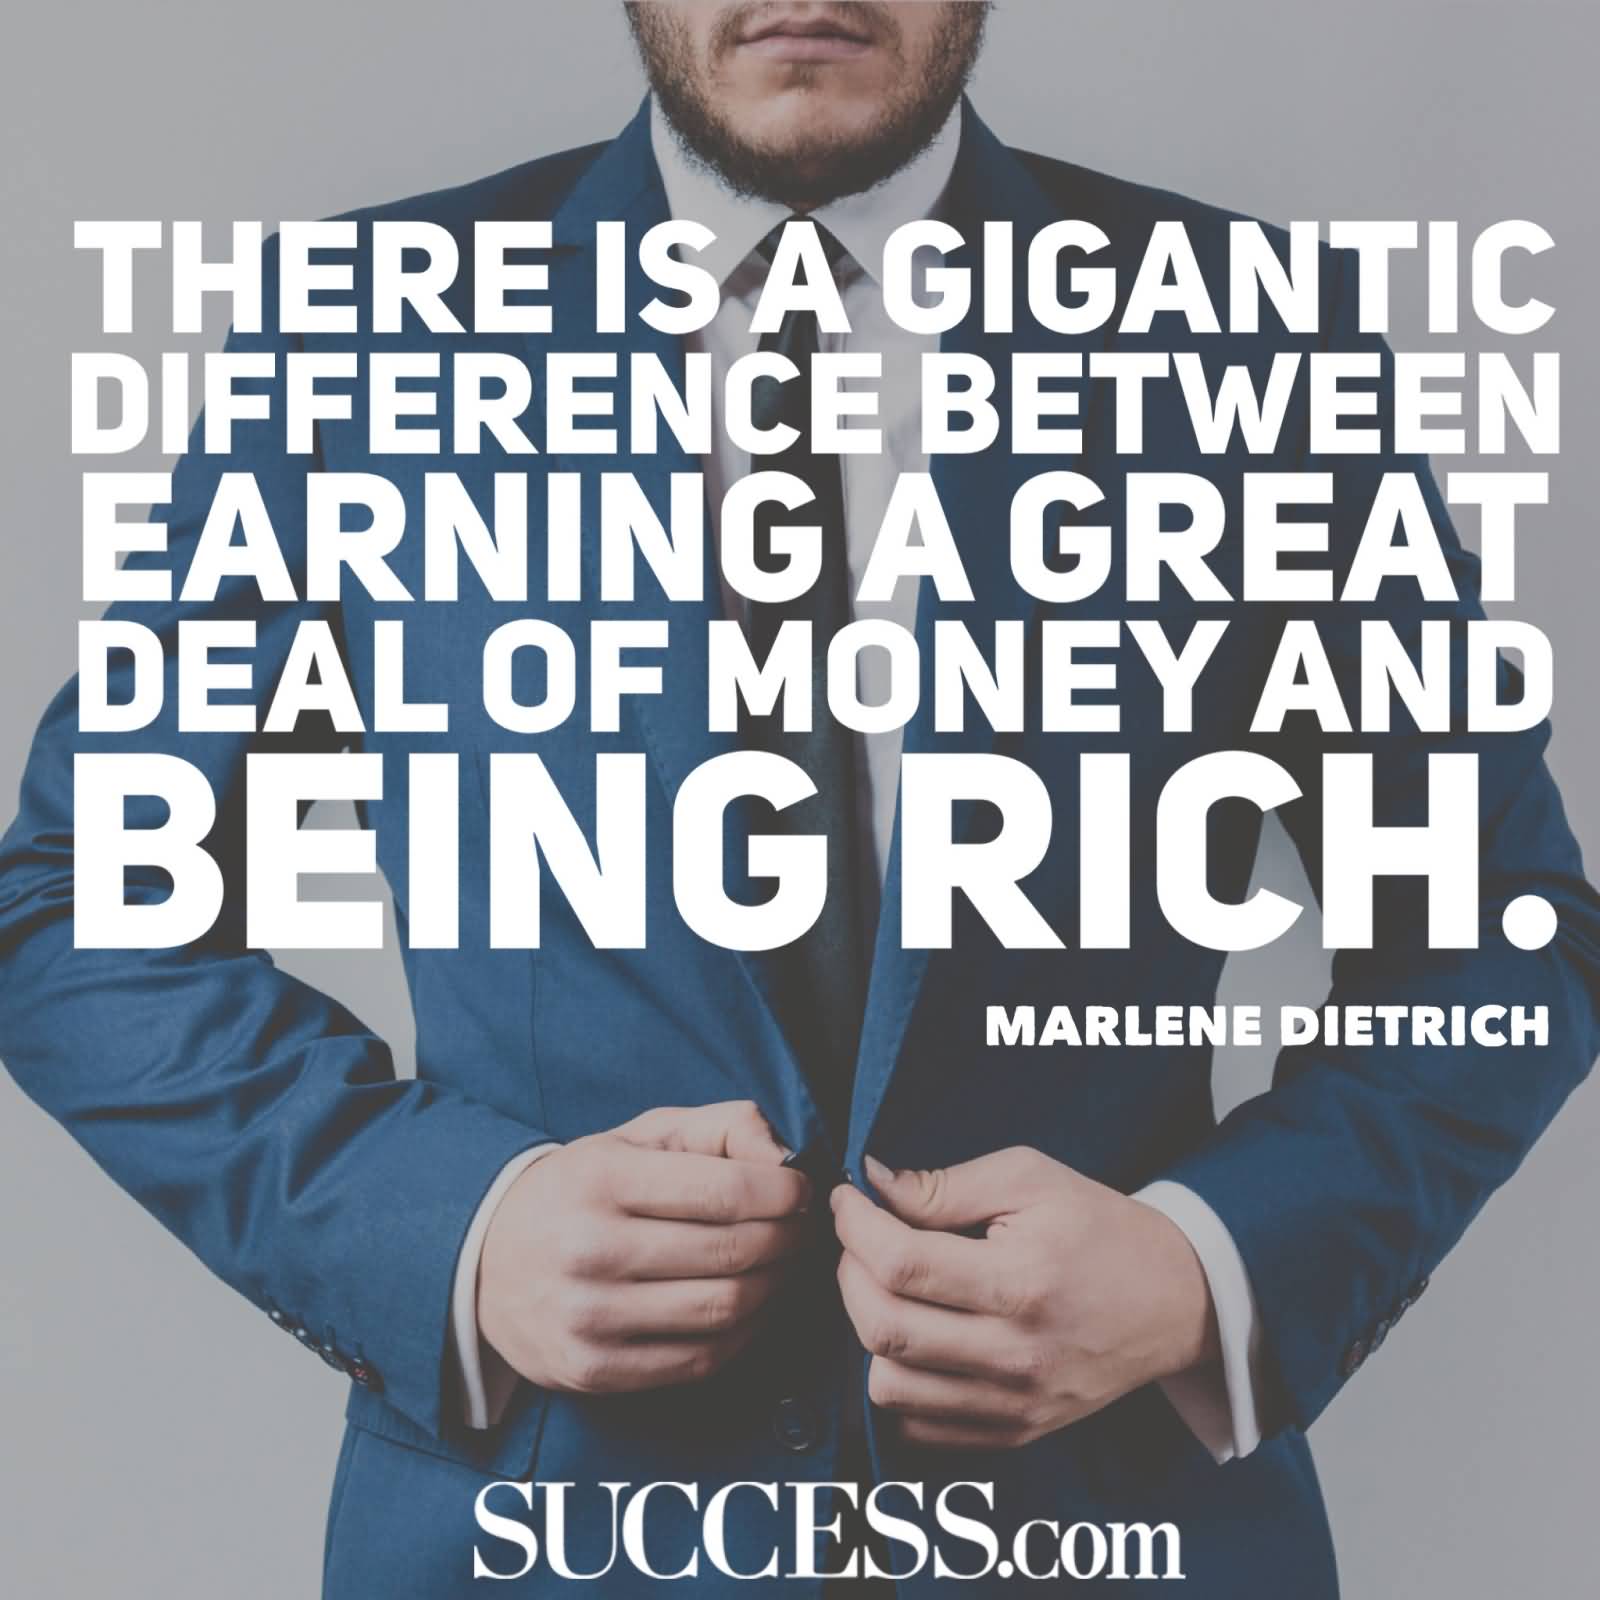 There is a gigantic difference between earning a great deal of money and being rich. Marlene Dietrich